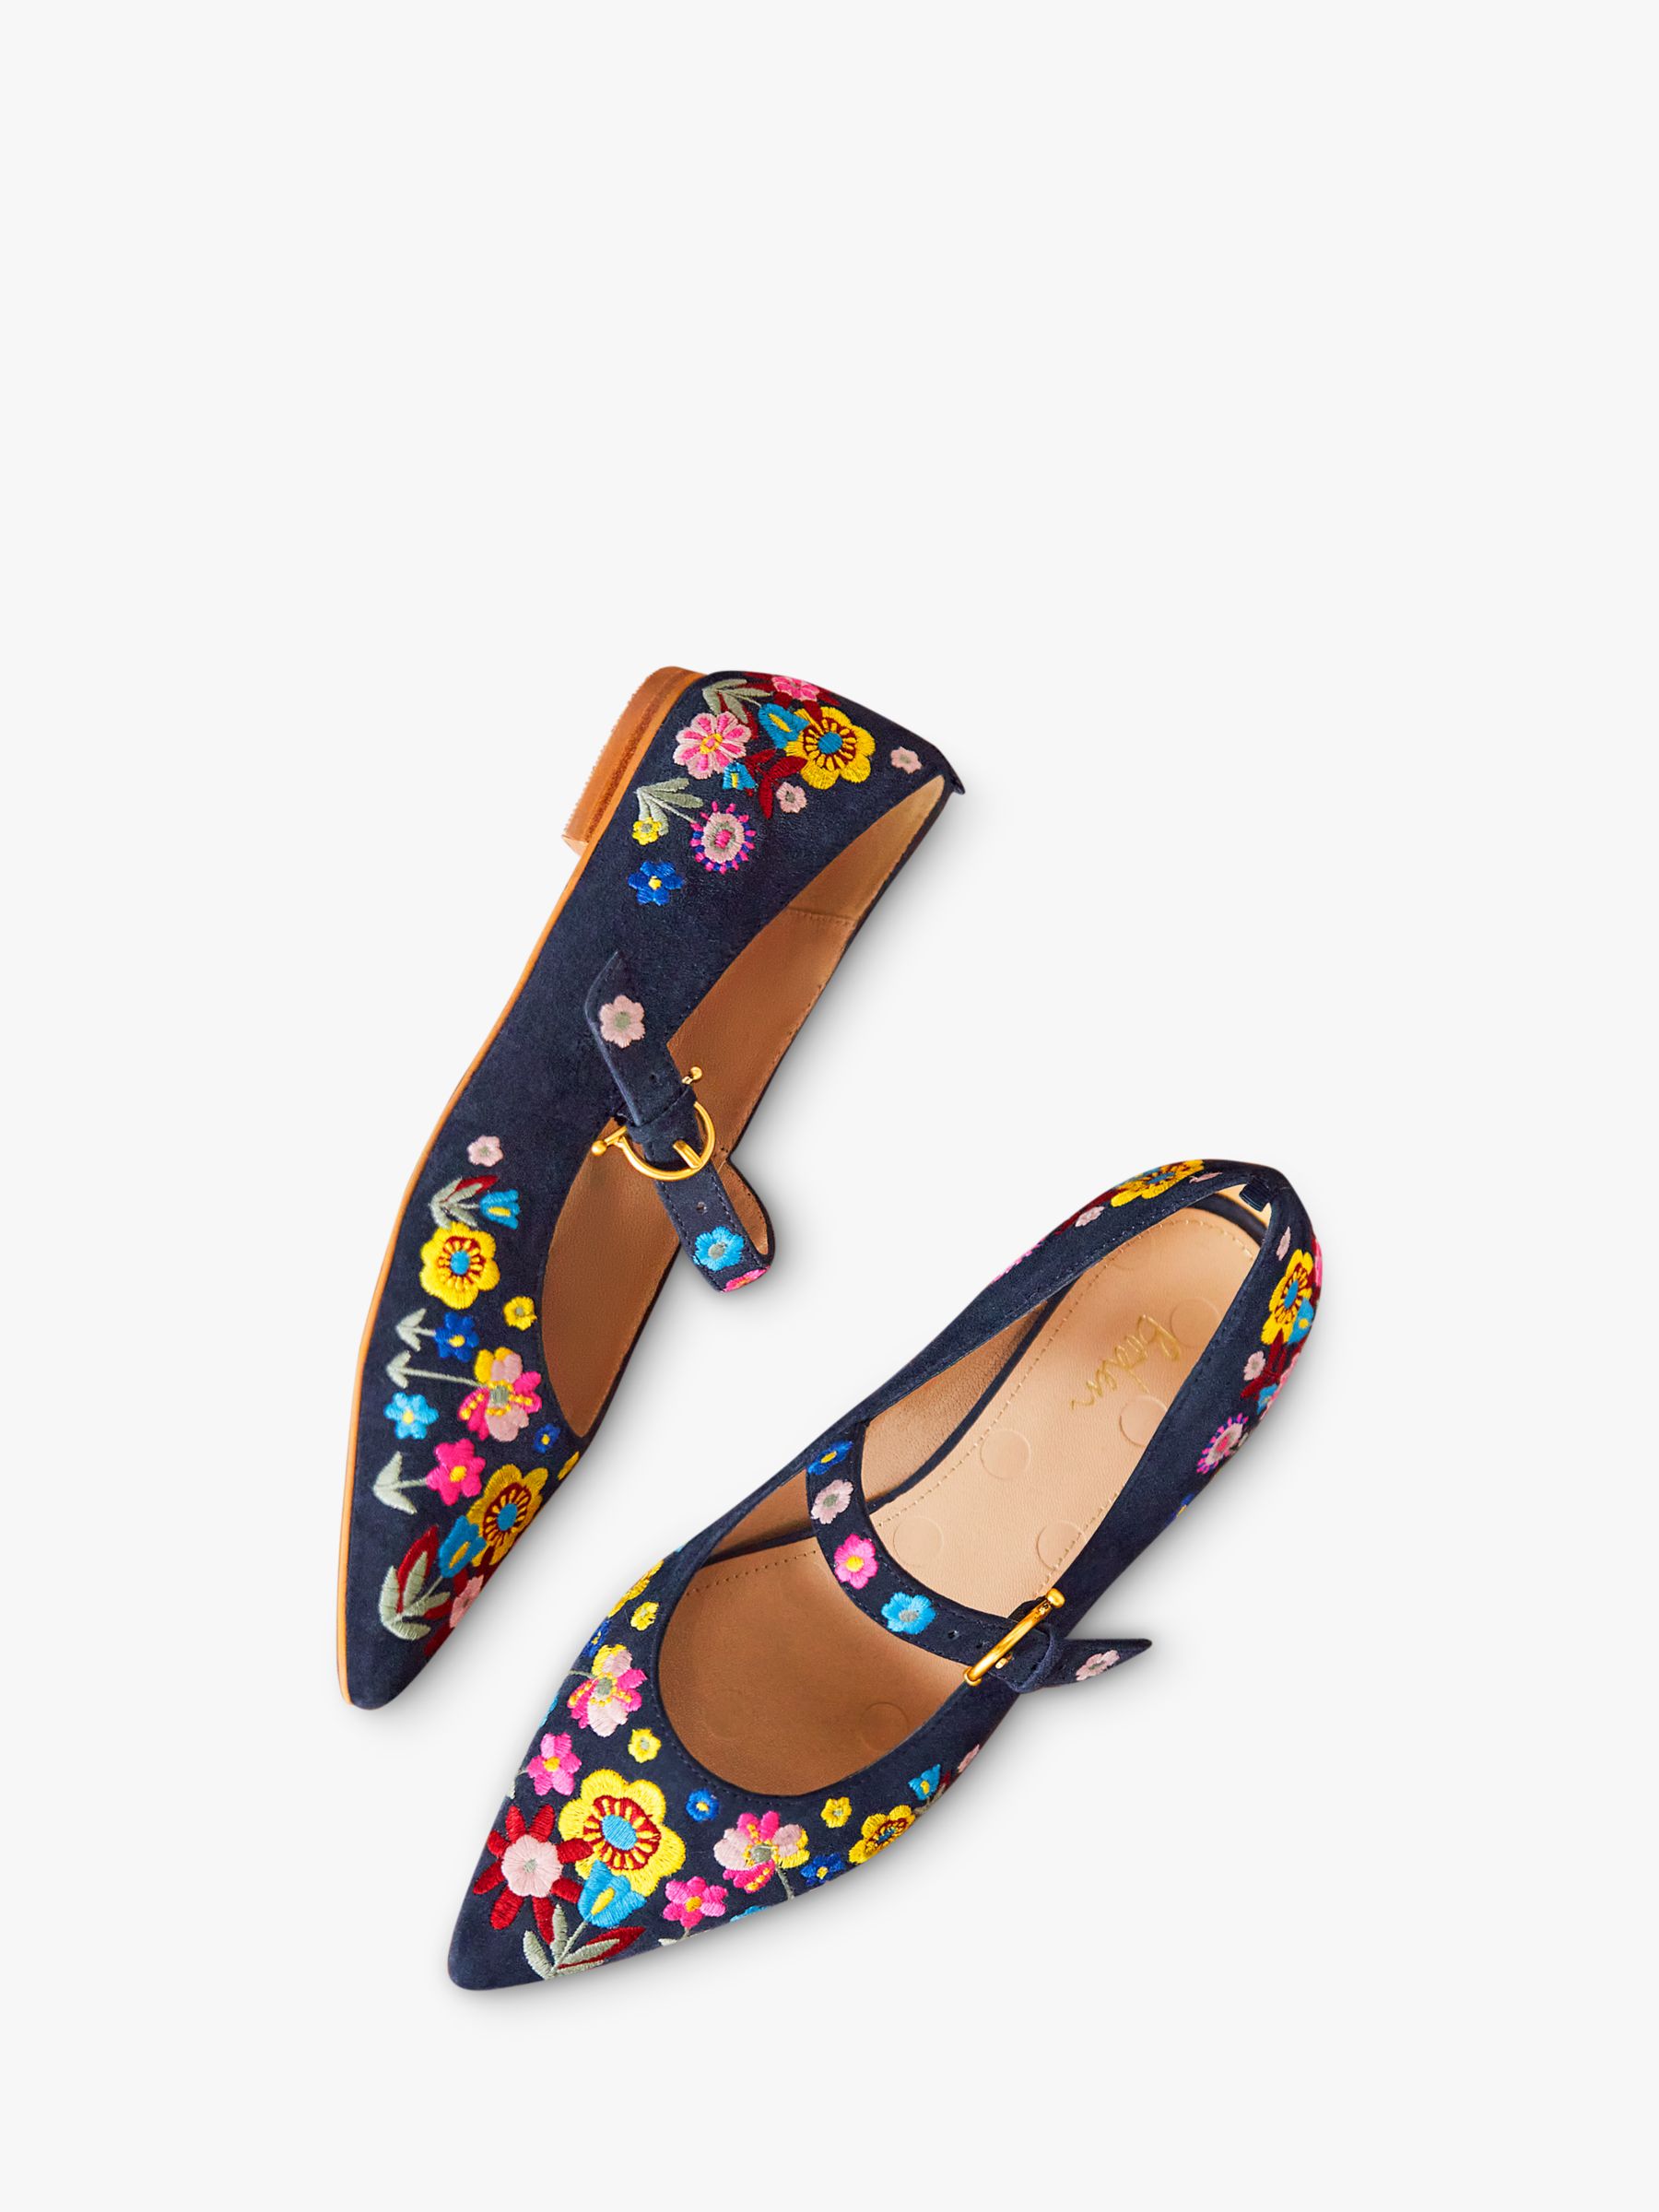 Boden Floral Embroidered Mary Jane Shoes, Navy/Multi